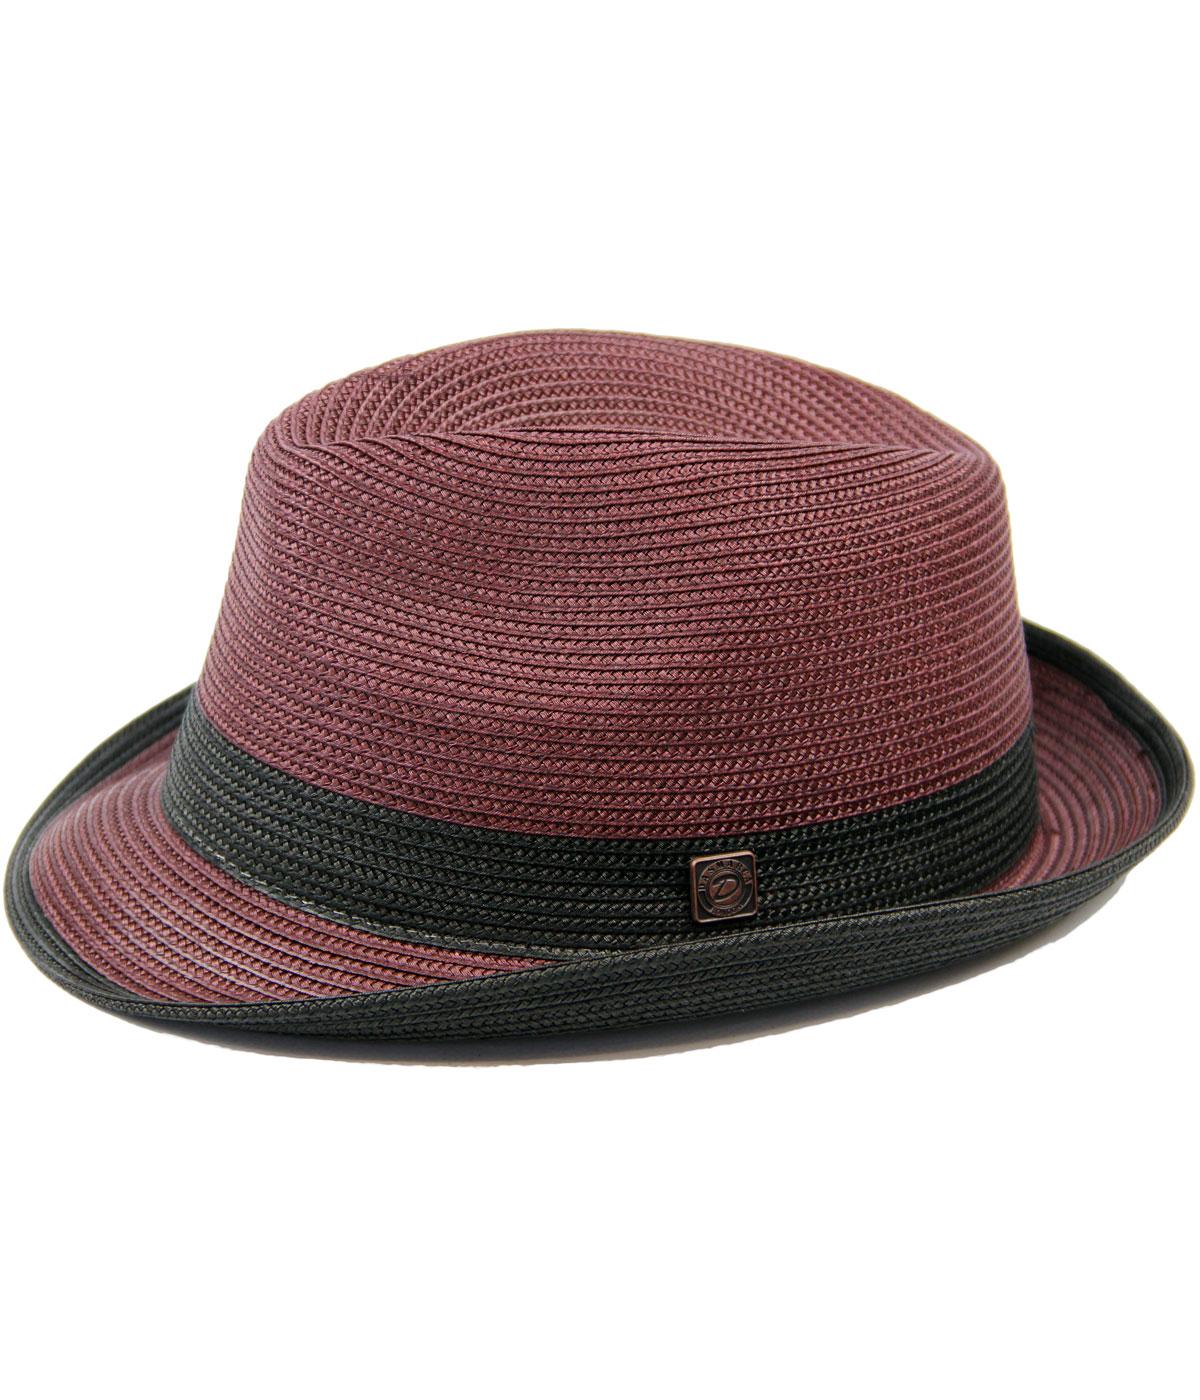 DASMARCA Florence Rtero Indie Mod 2-Tone Weave Trilby in Wine